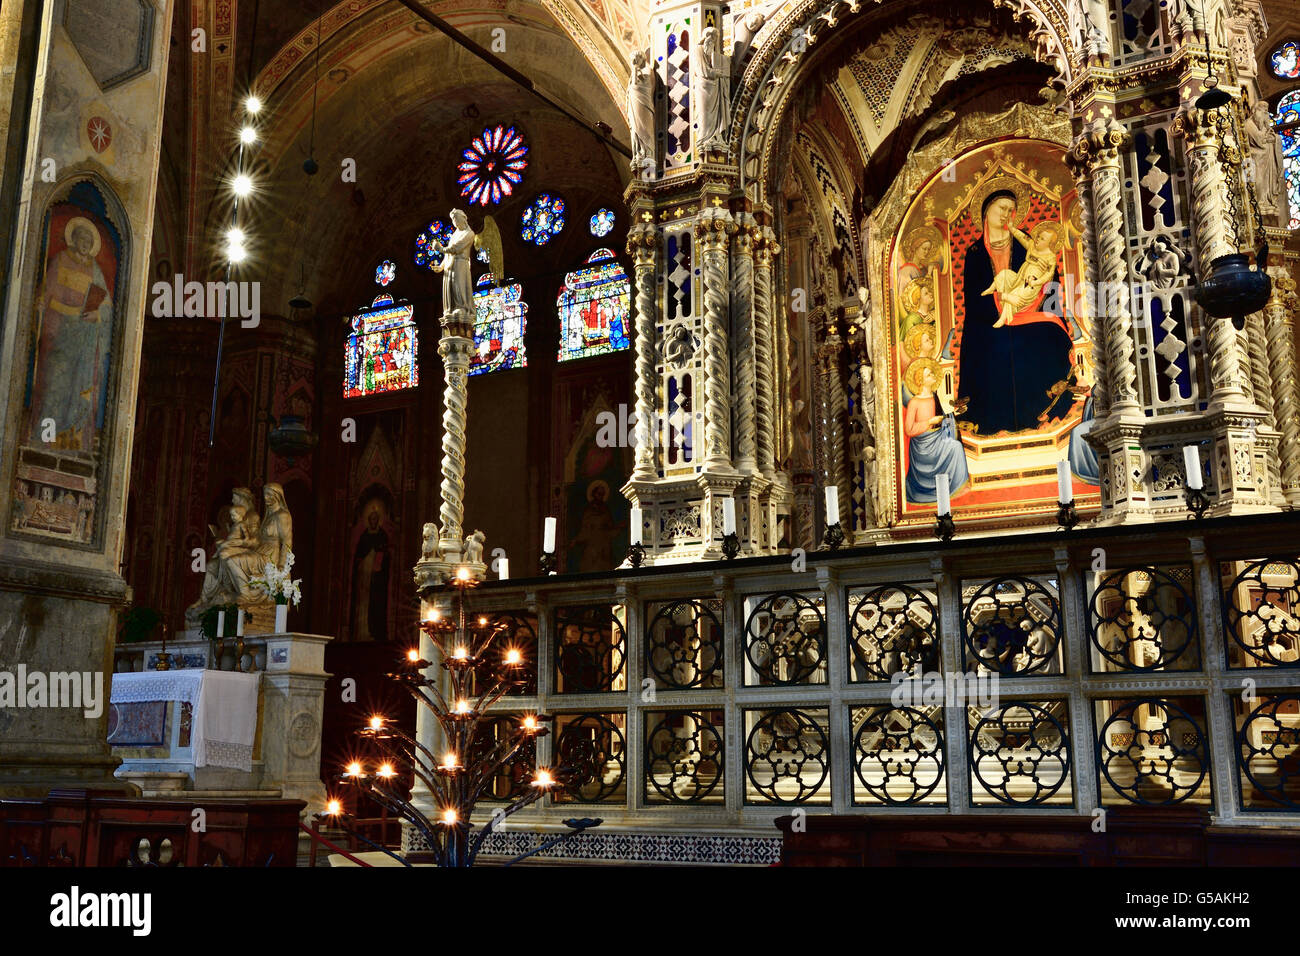 Orsanmichele church, monumental marble gothic tabernacle of Andrea Orcagna (1359). Stock Photo